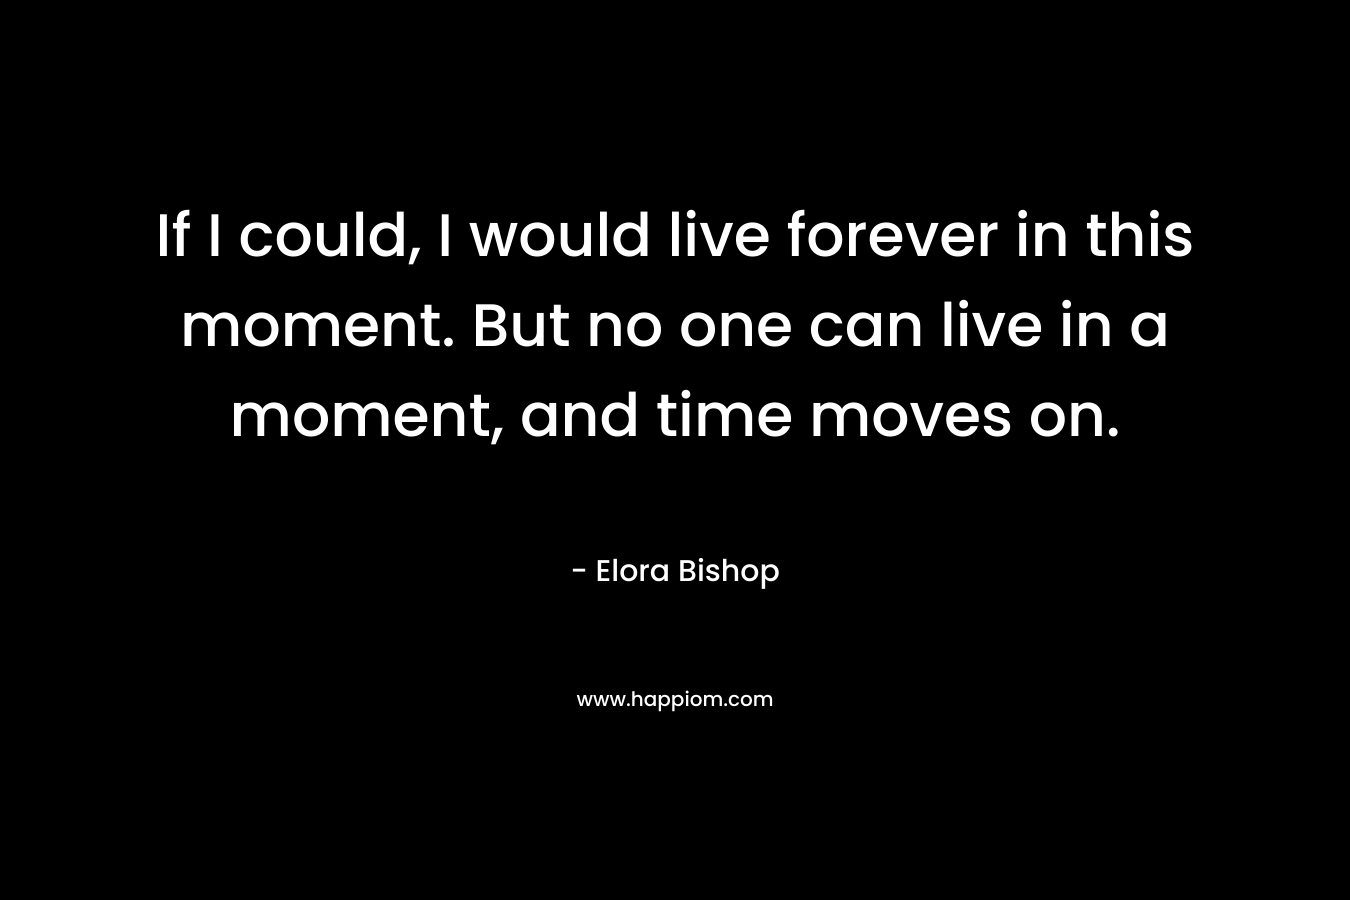 If I could, I would live forever in this moment. But no one can live in a moment, and time moves on.